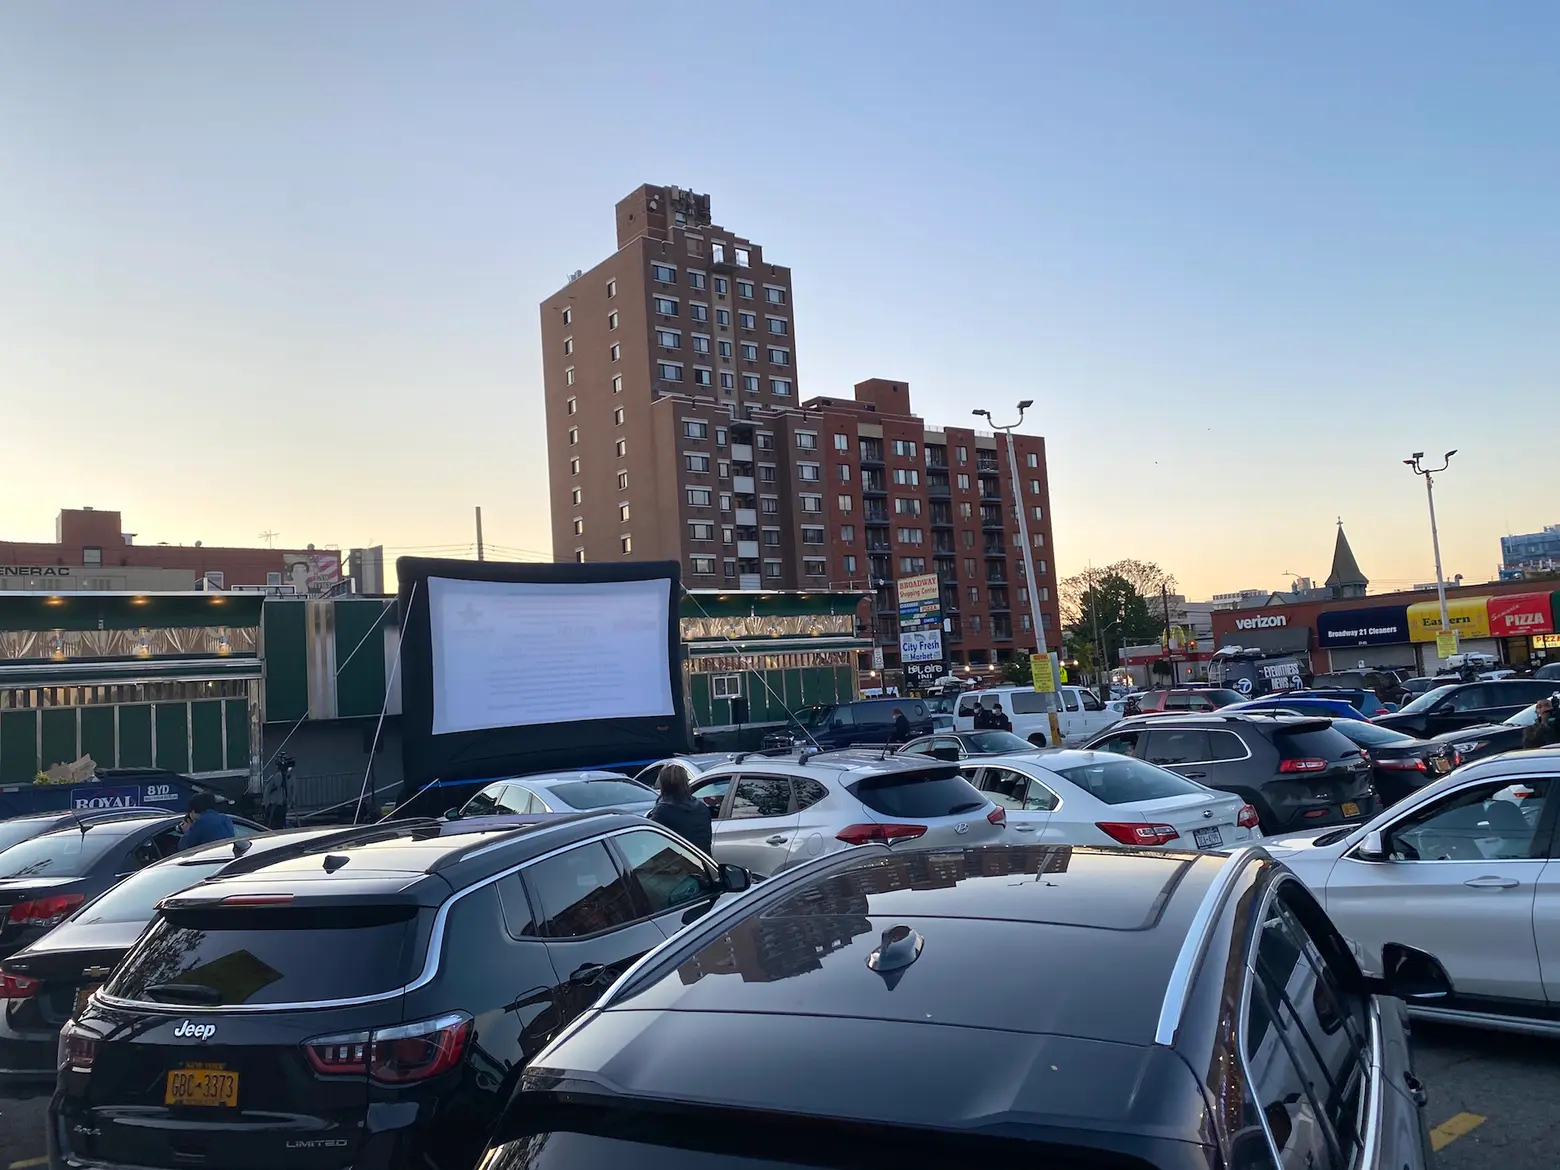 A diner in Astoria has transformed into a pop-up drive-in